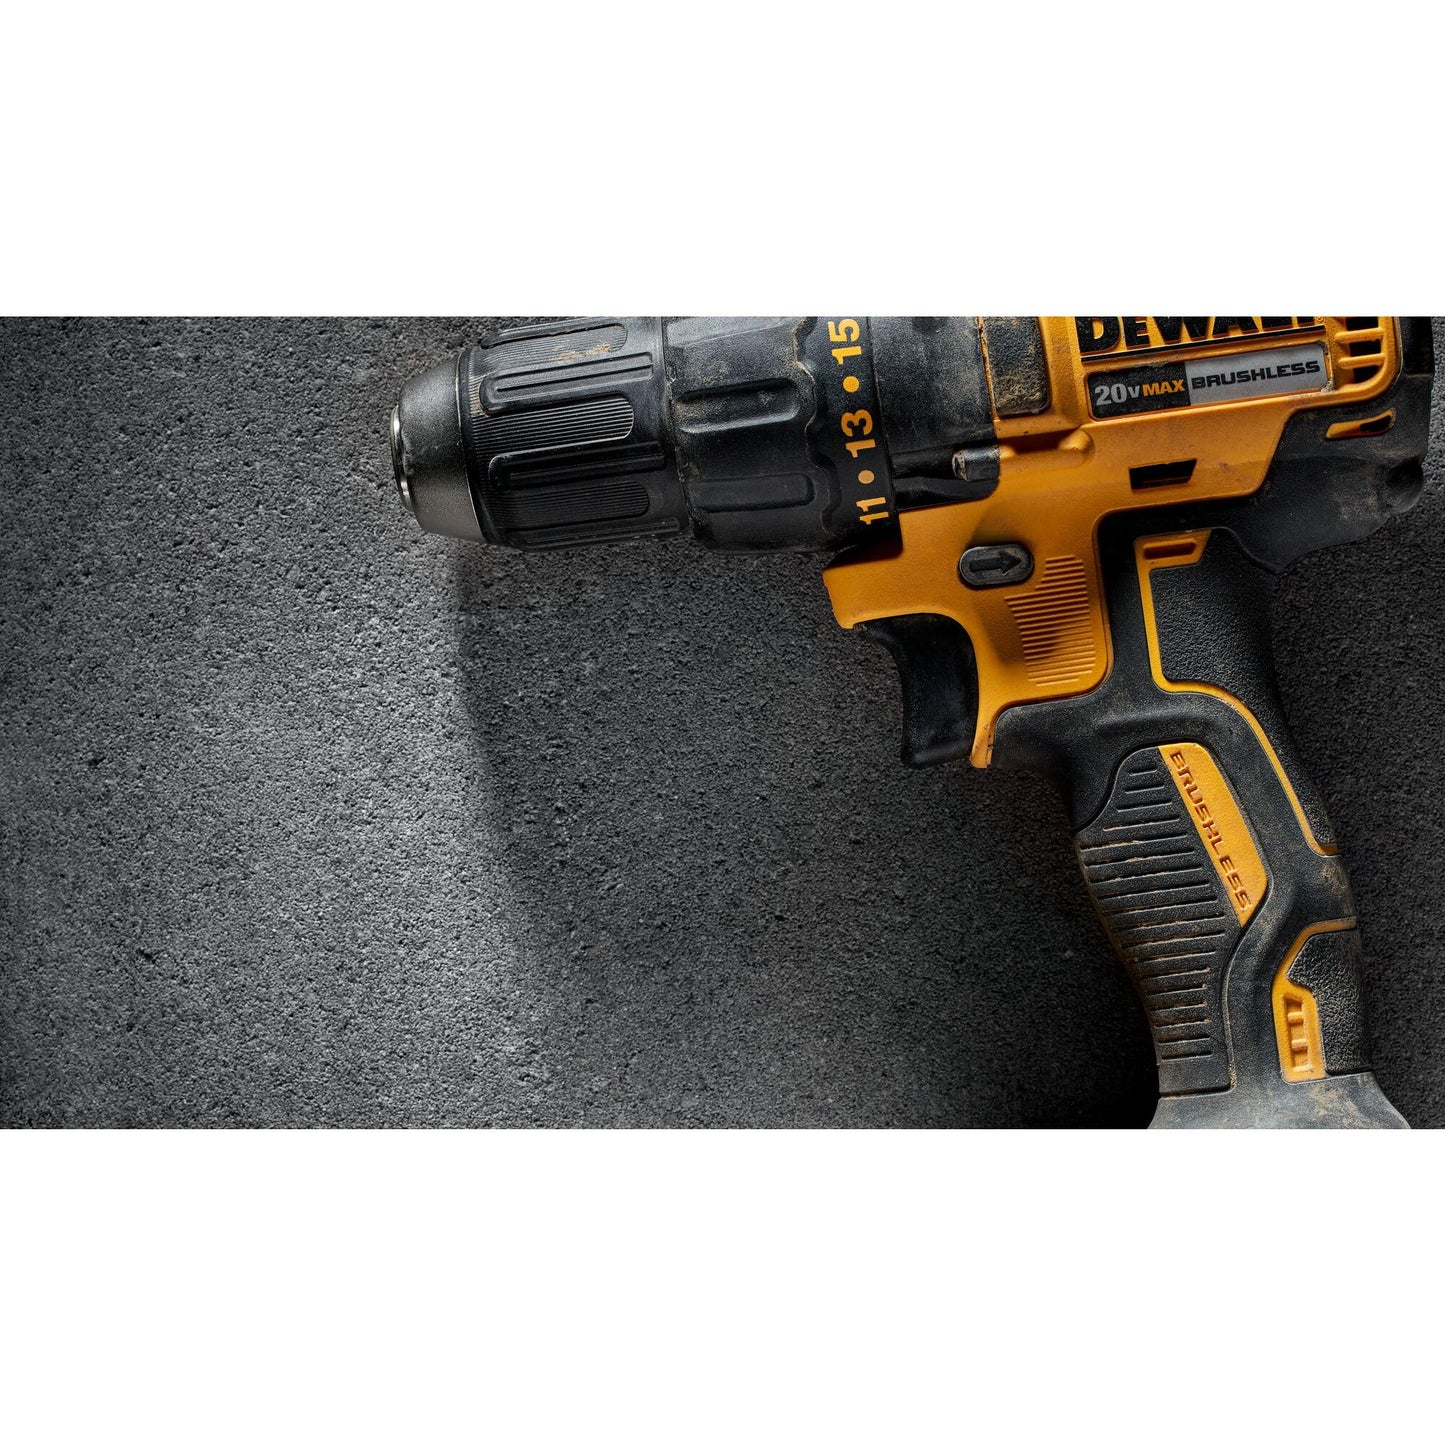 DEWALT 20V MAX Cordless Drill Driver, 1/2 Inch, 2 Speed, XR 2.0 Ah Battery and Charger Included (DCD777D1)